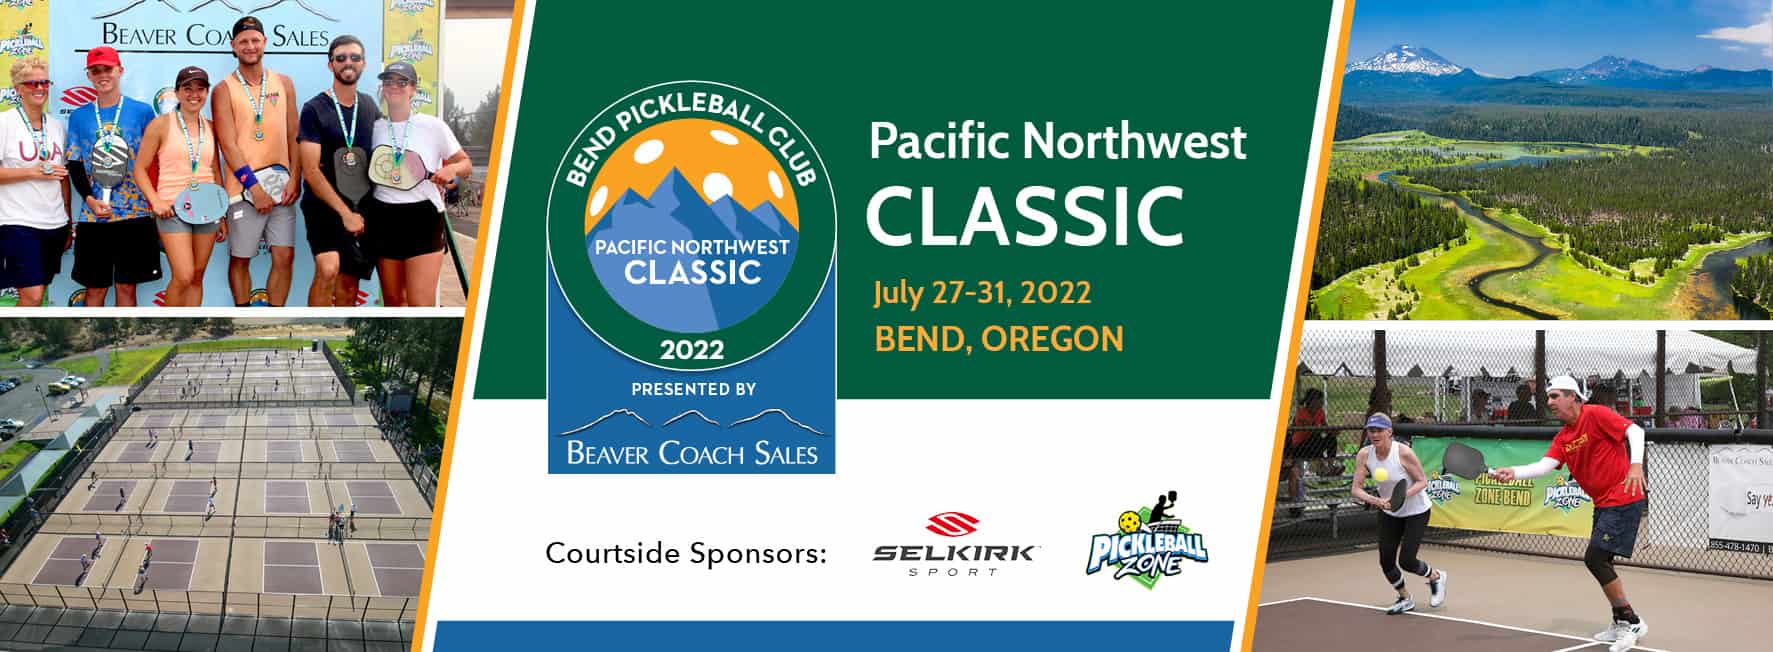 Pacific Northwest Classic 2022 sponsored by Beaver Coach Sales